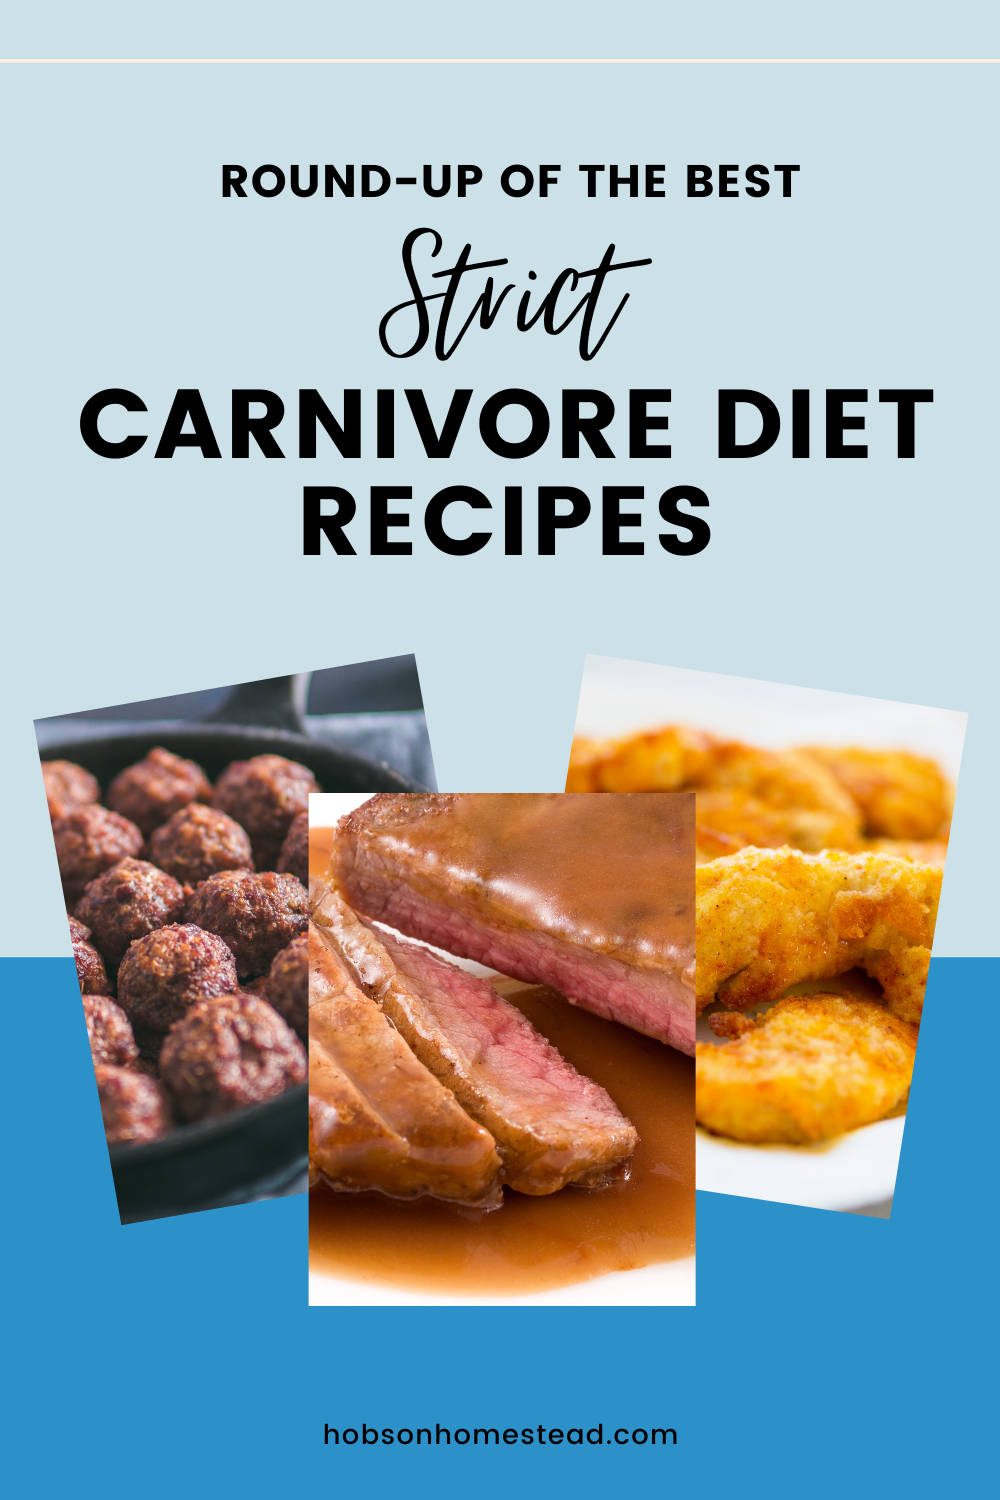 Round-Up Of The Best Strict Carnivore Diet Recipes